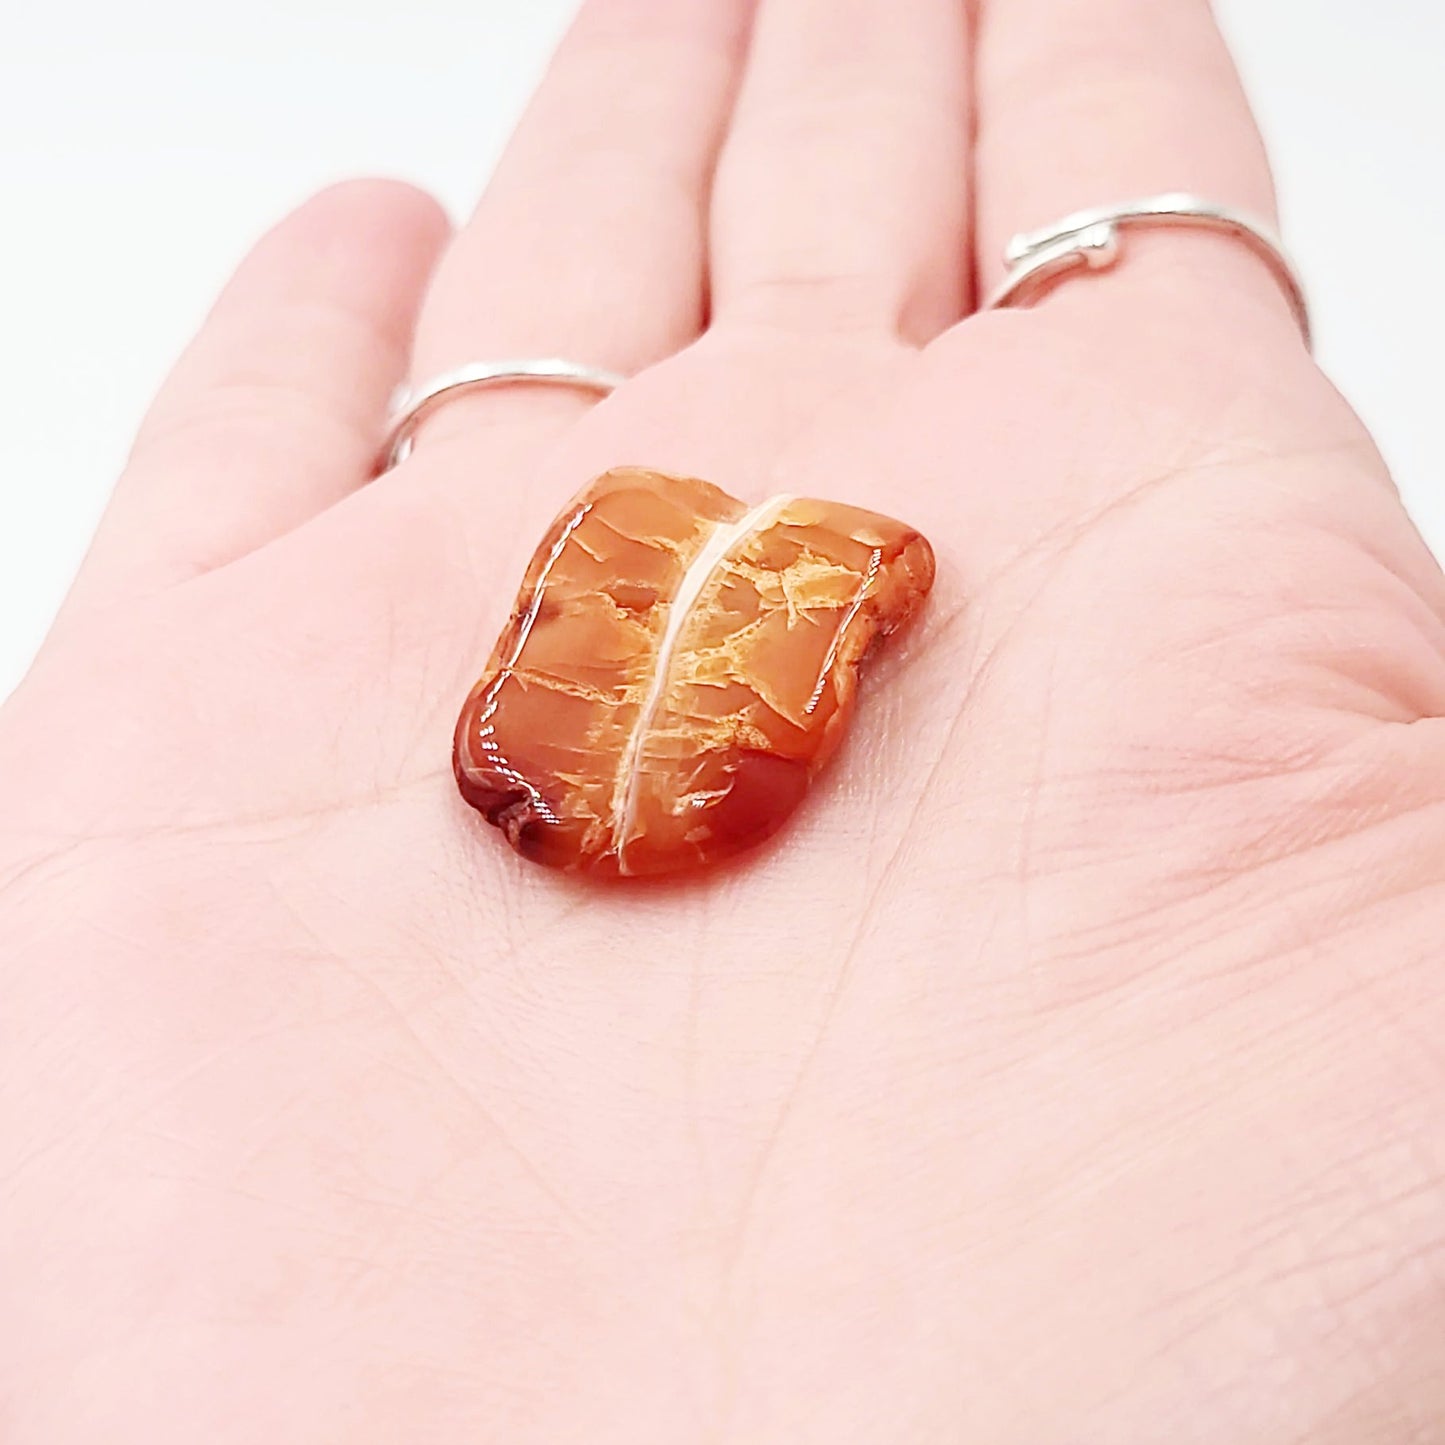 Carnelian Cabochon Free Form "Small" Polished Cut Stone - Elevated Metaphysical